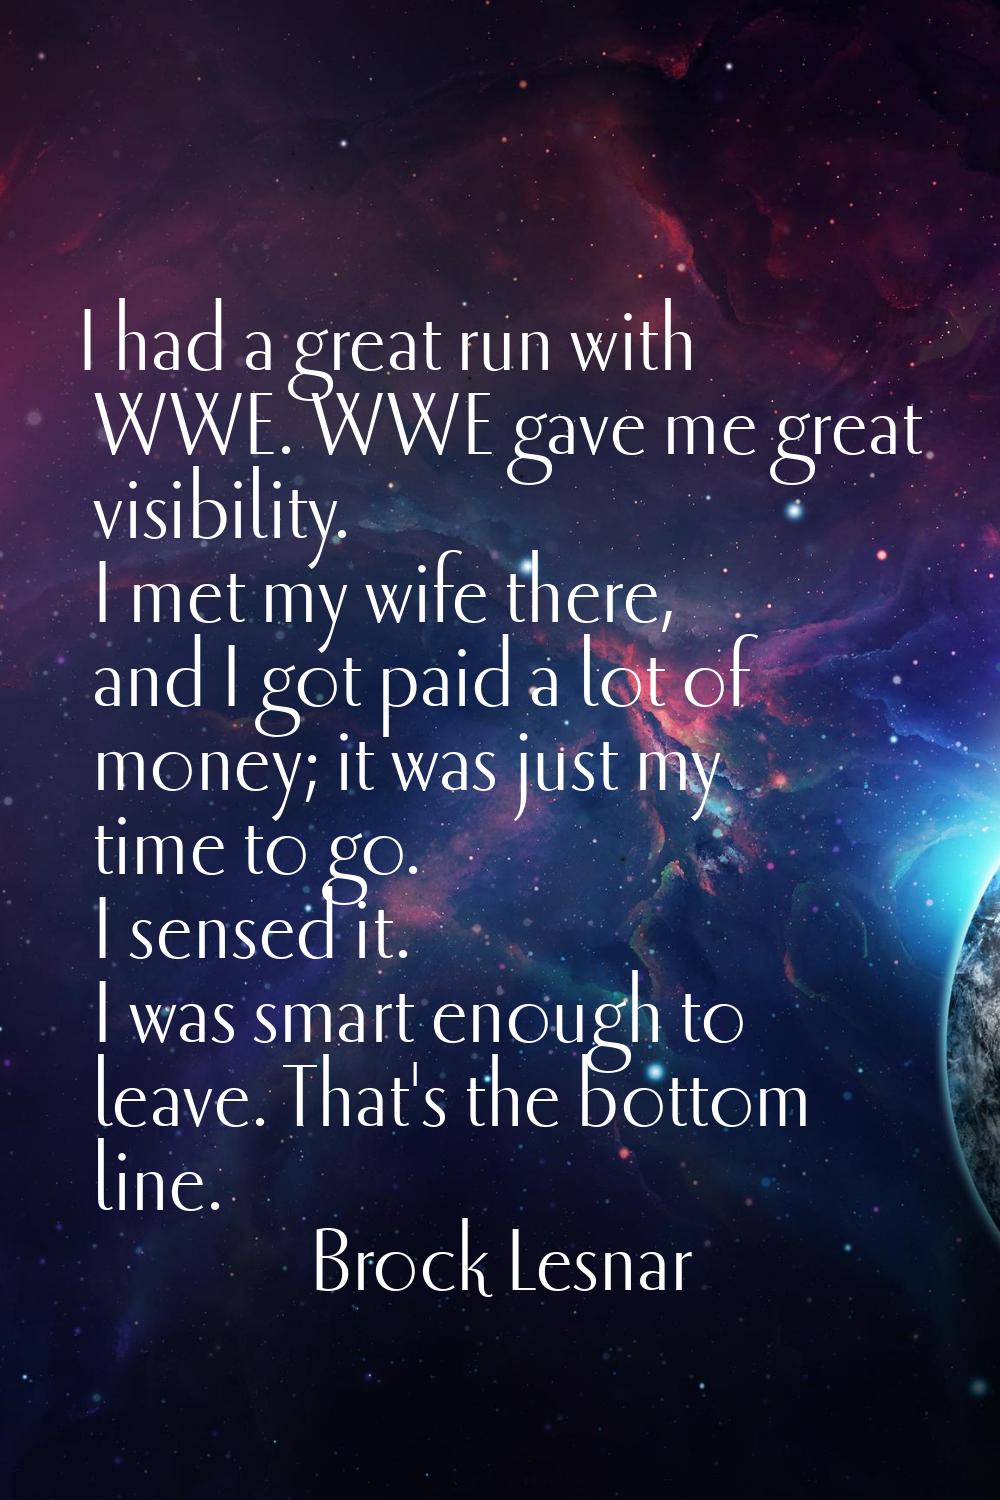 I had a great run with WWE. WWE gave me great visibility. I met my wife there, and I got paid a lot